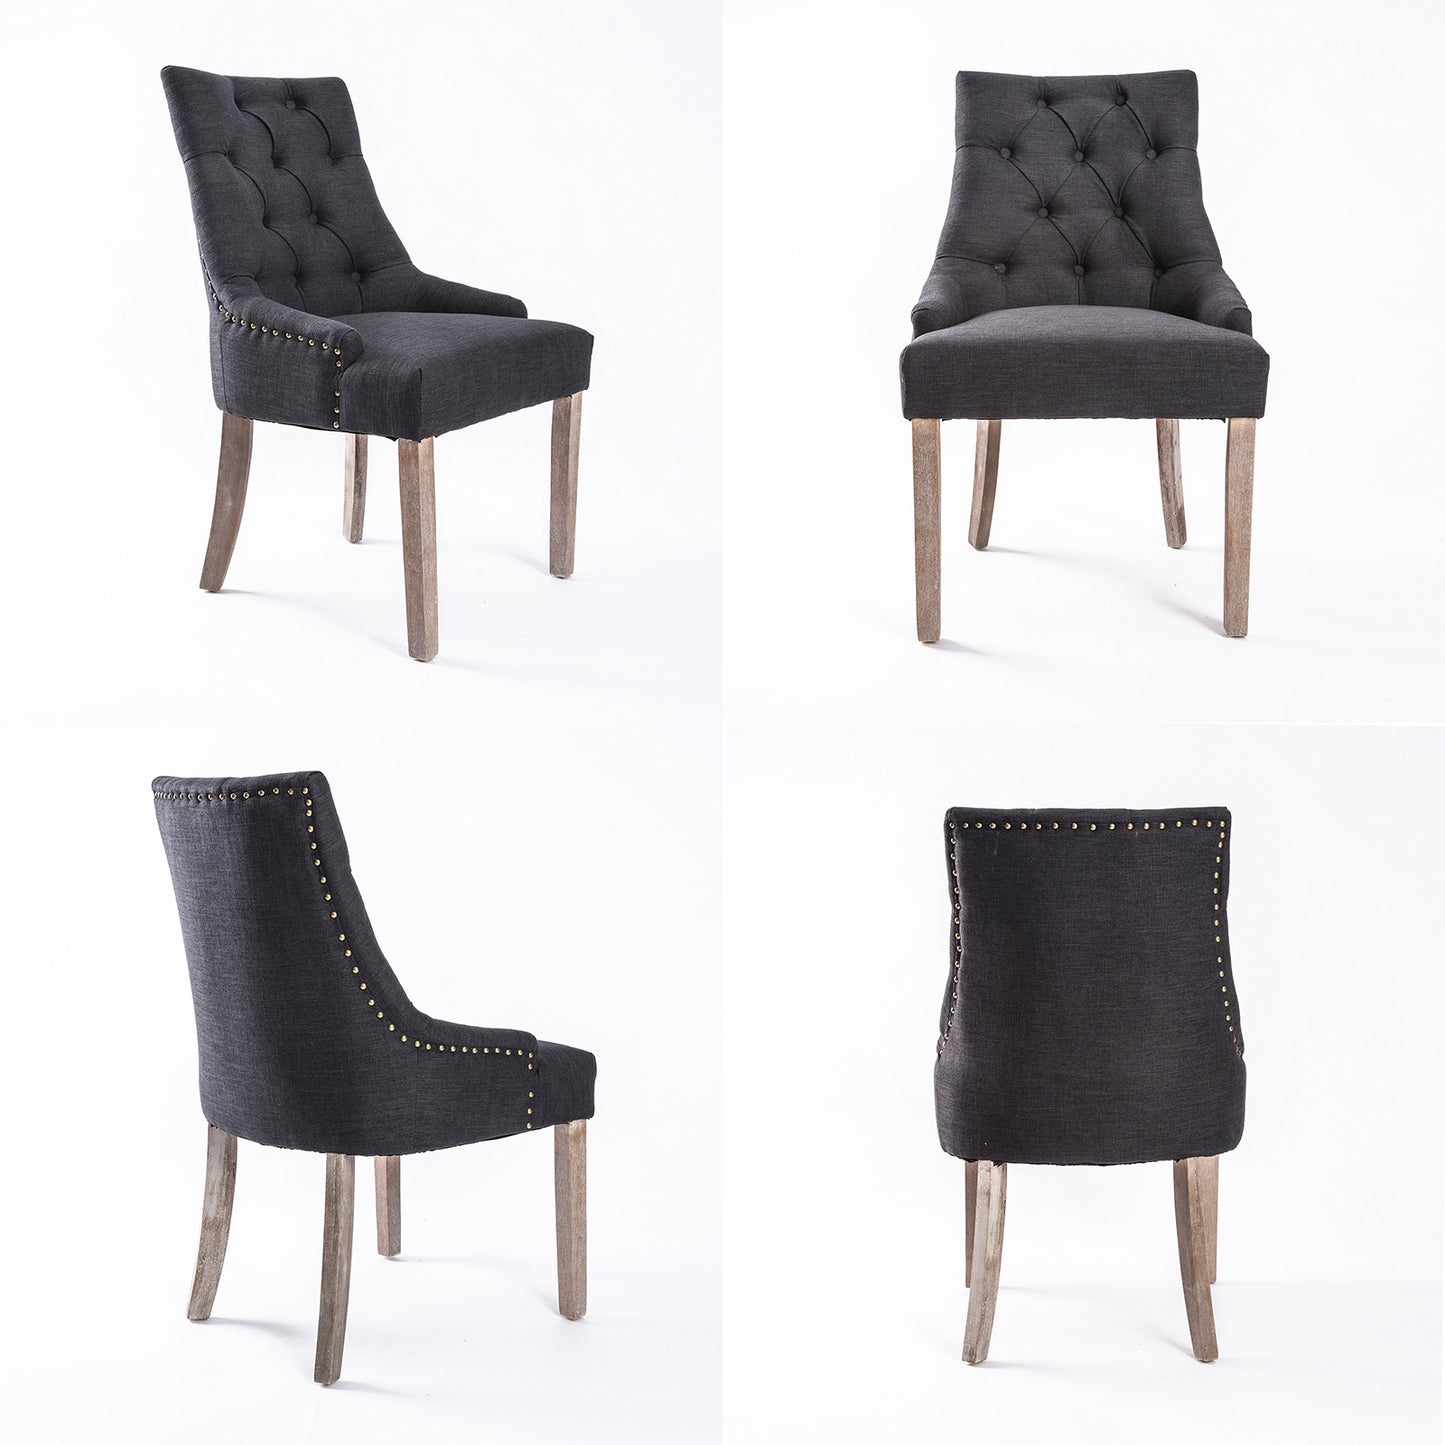 4 Set Black (Charcoal) French Provincial Dining Chair Amour Oak Leg - image4